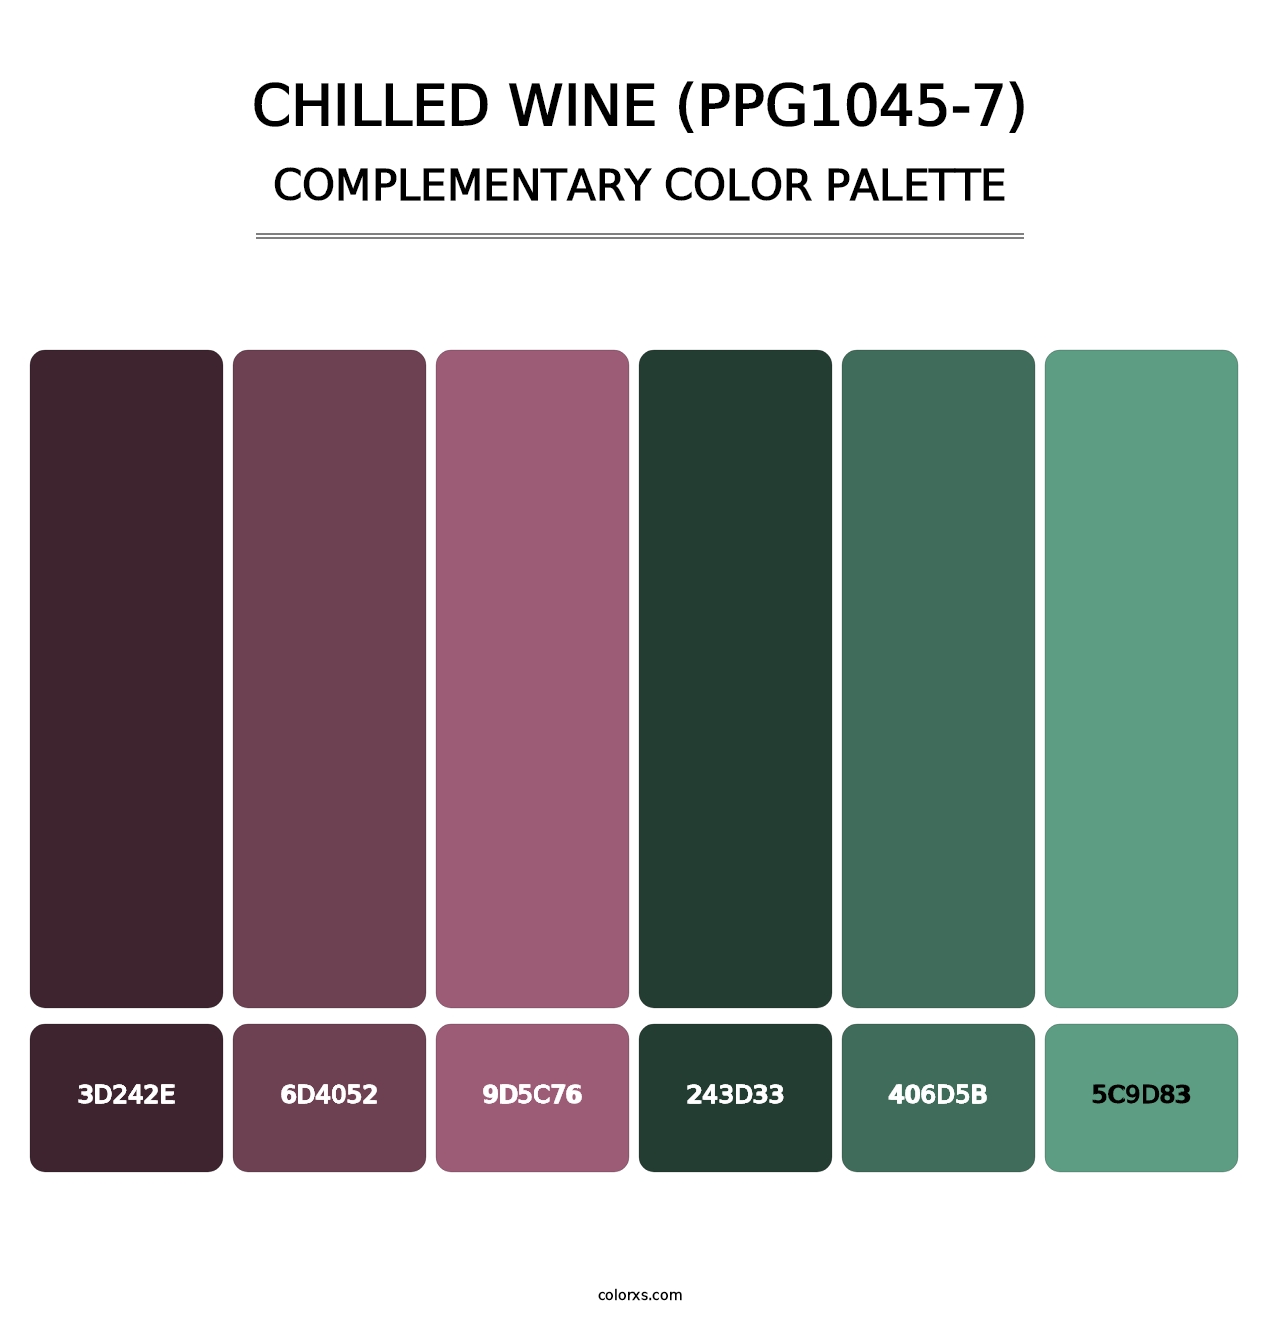 Chilled Wine (PPG1045-7) - Complementary Color Palette